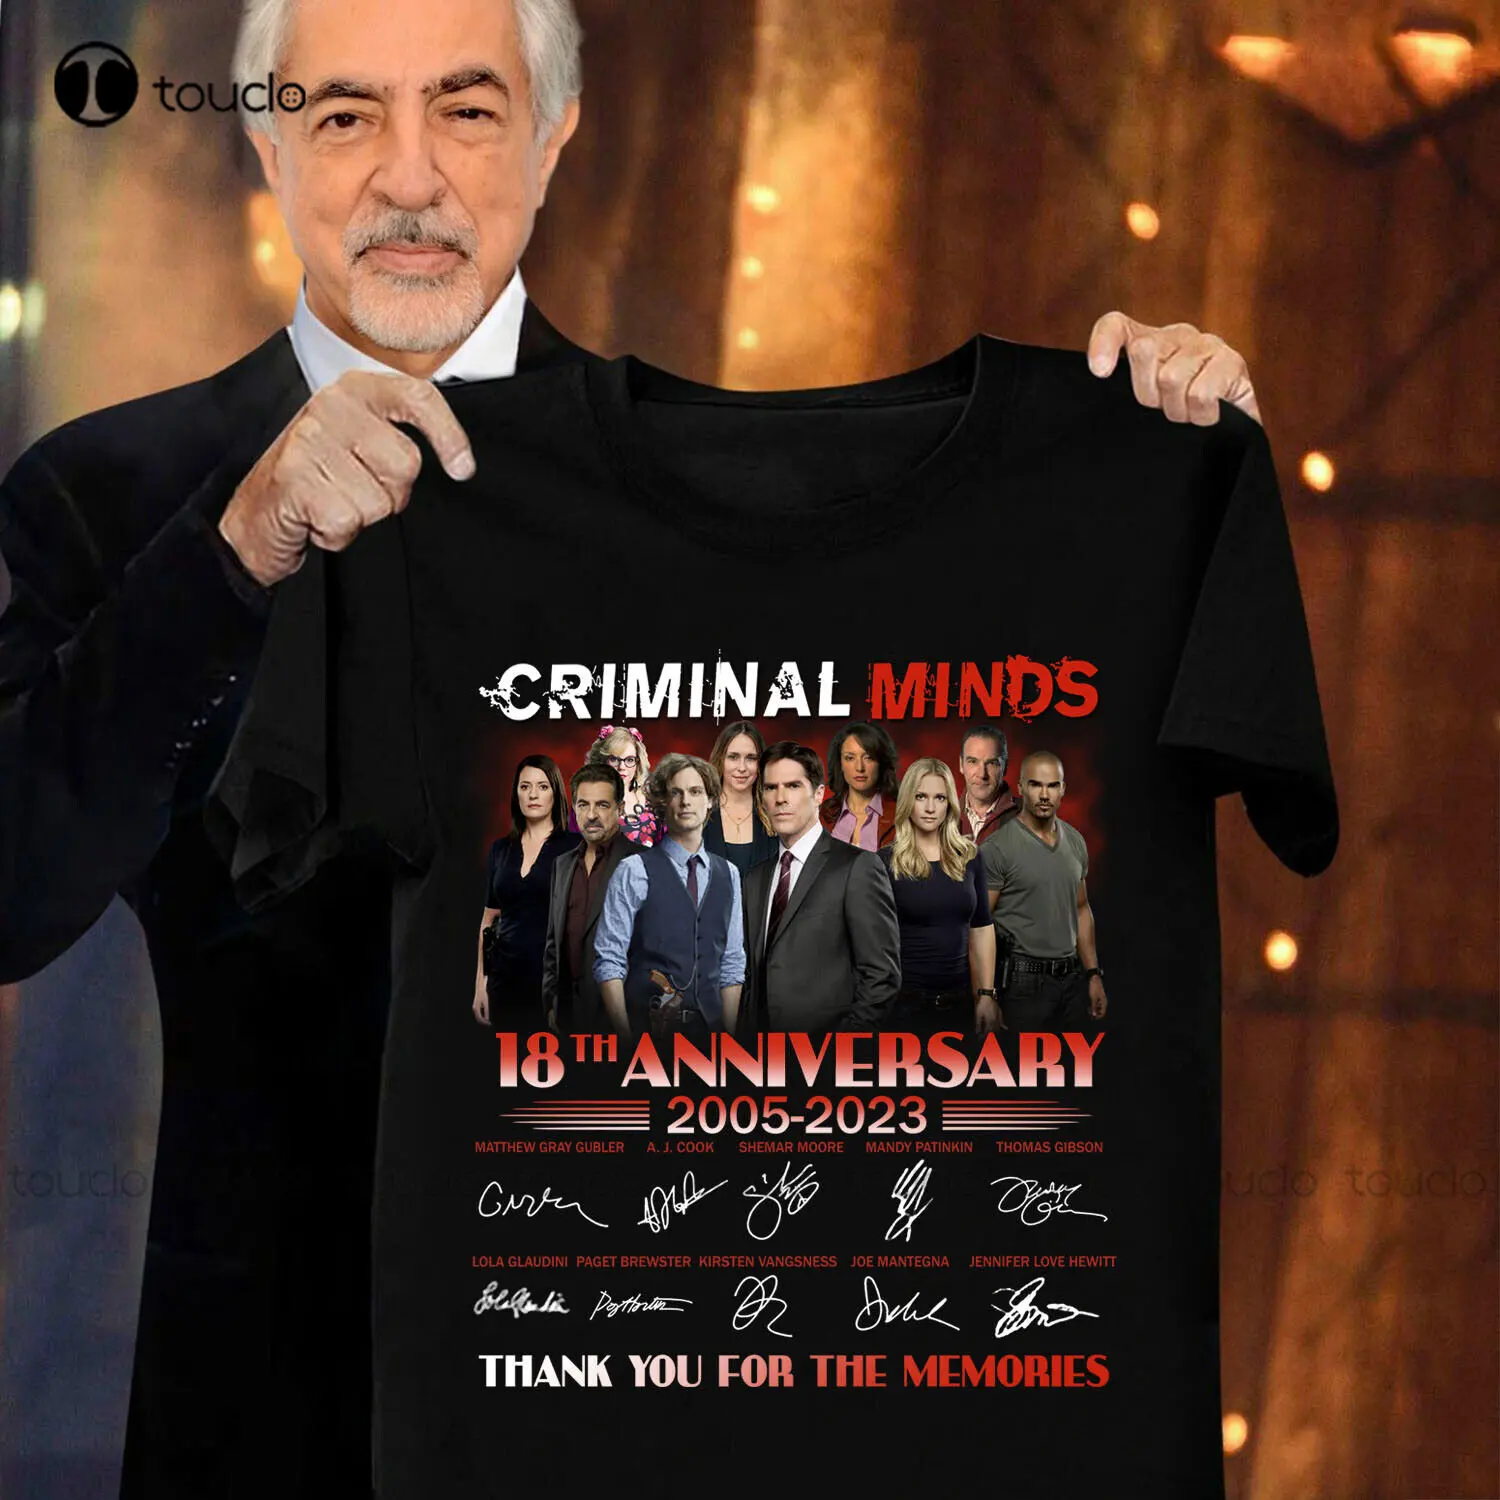 

Criminal Minds 18Th Anniversary 2005-2023 Signatures Gift For Fans Movie Shirt Blue Shirts For Women Digital Printing Tee Shirts